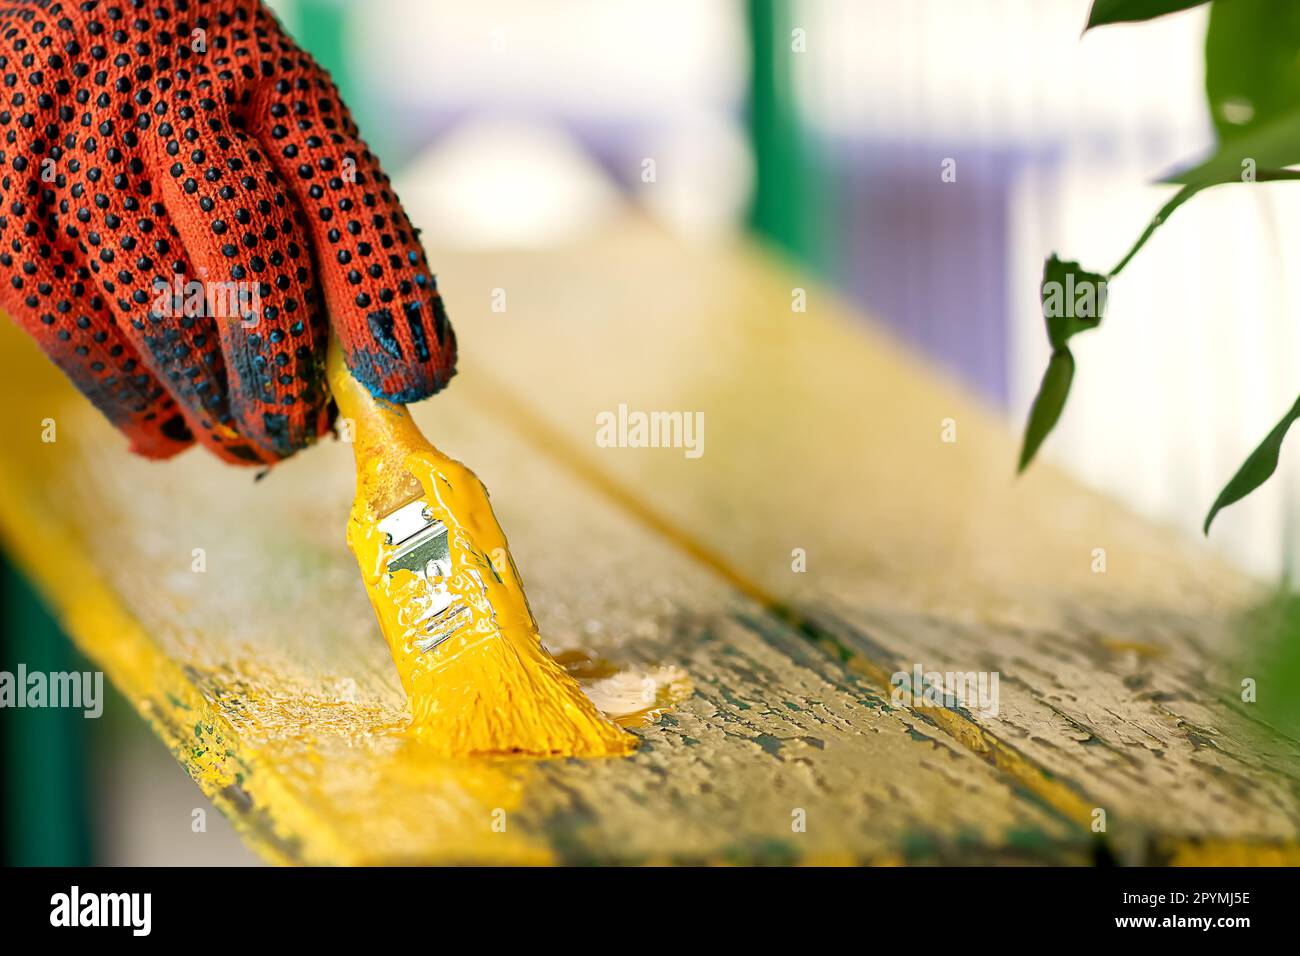 a person holds a brush with, yellow paint, on a wooden surface, repairs are carried out outdoors on the playground, the painter's hands are protected. Stock Photo